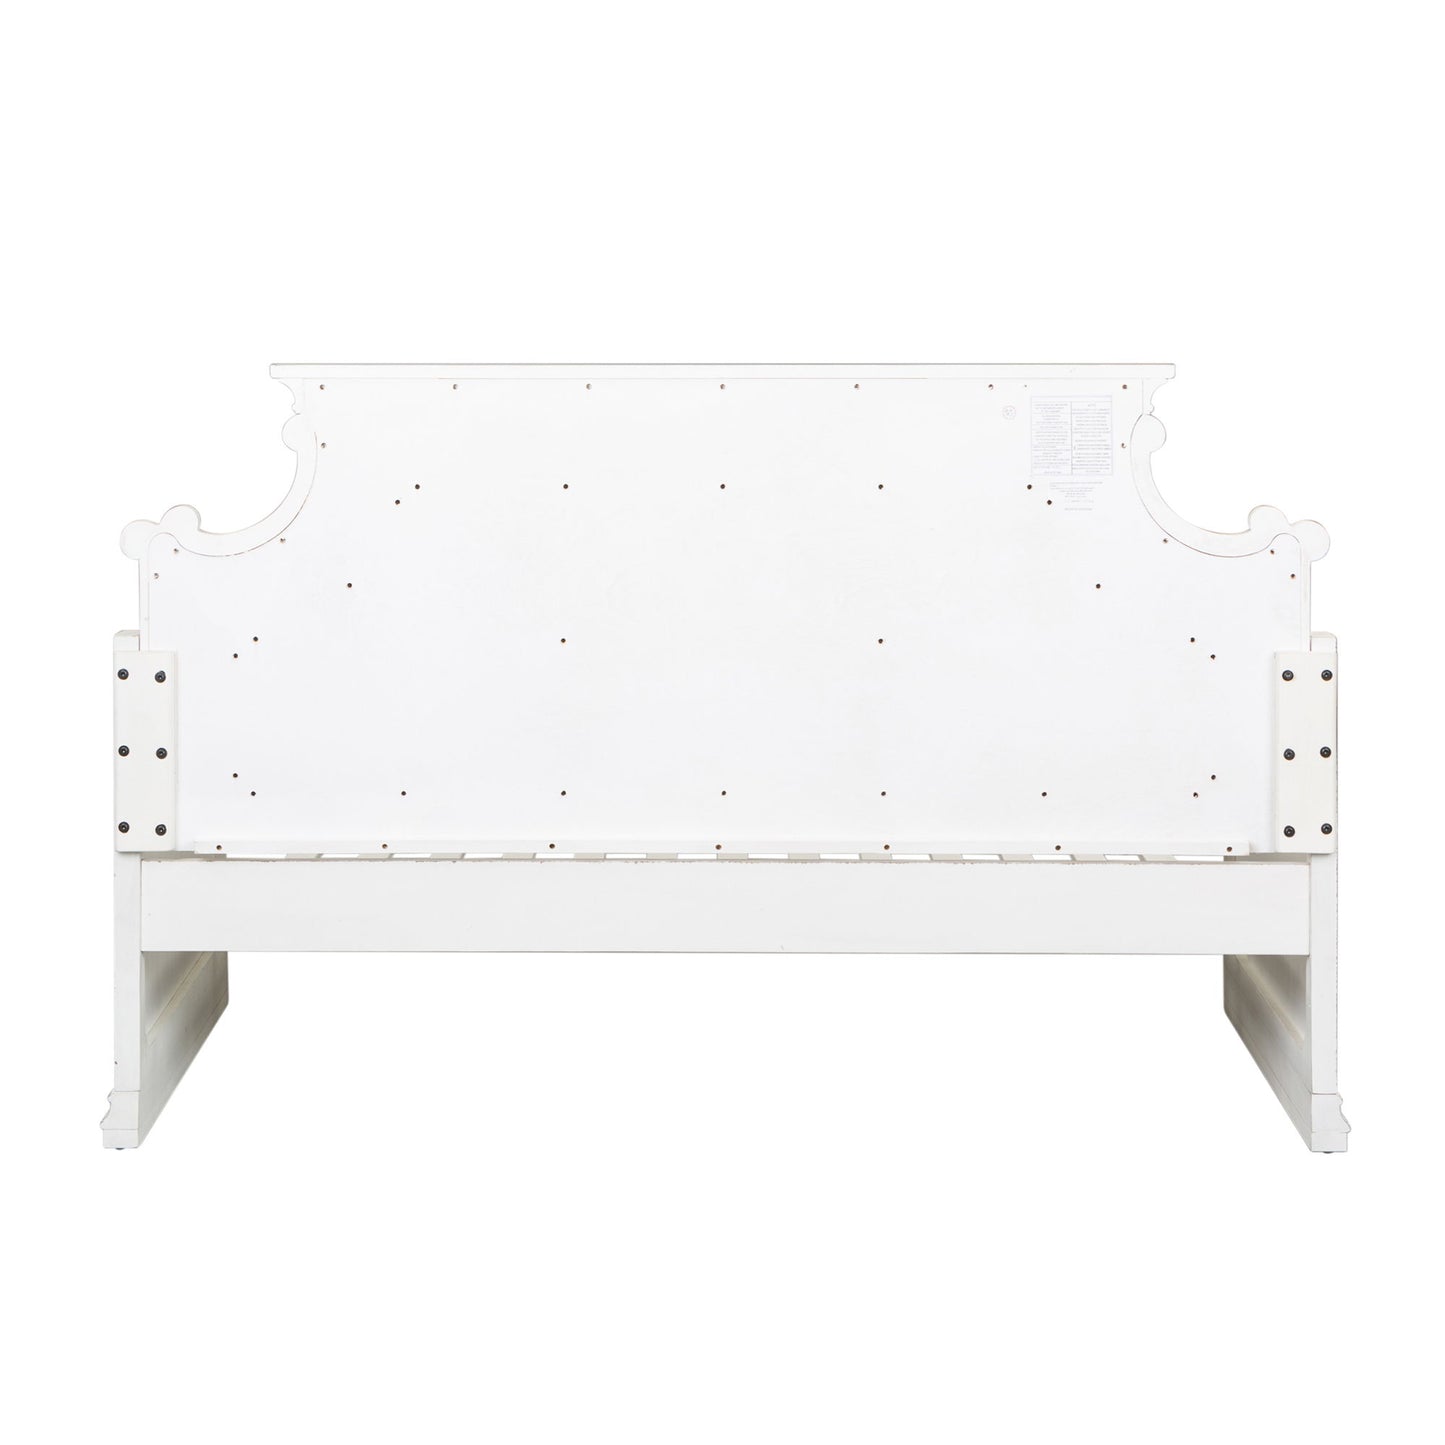 Magnolia Manor - Twin Daybed without Trundle - White